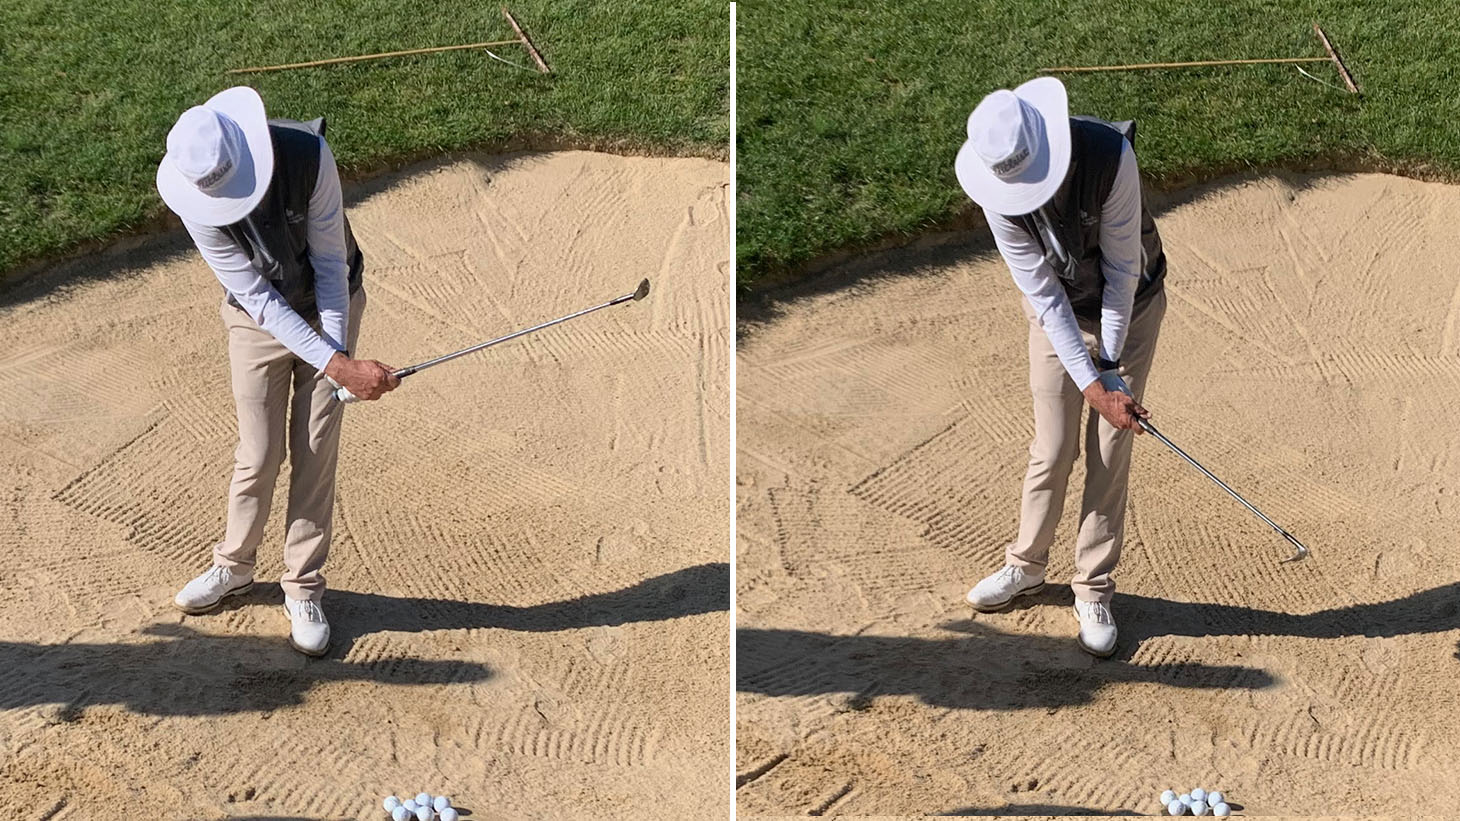 Another important fundamental of bunker play is...